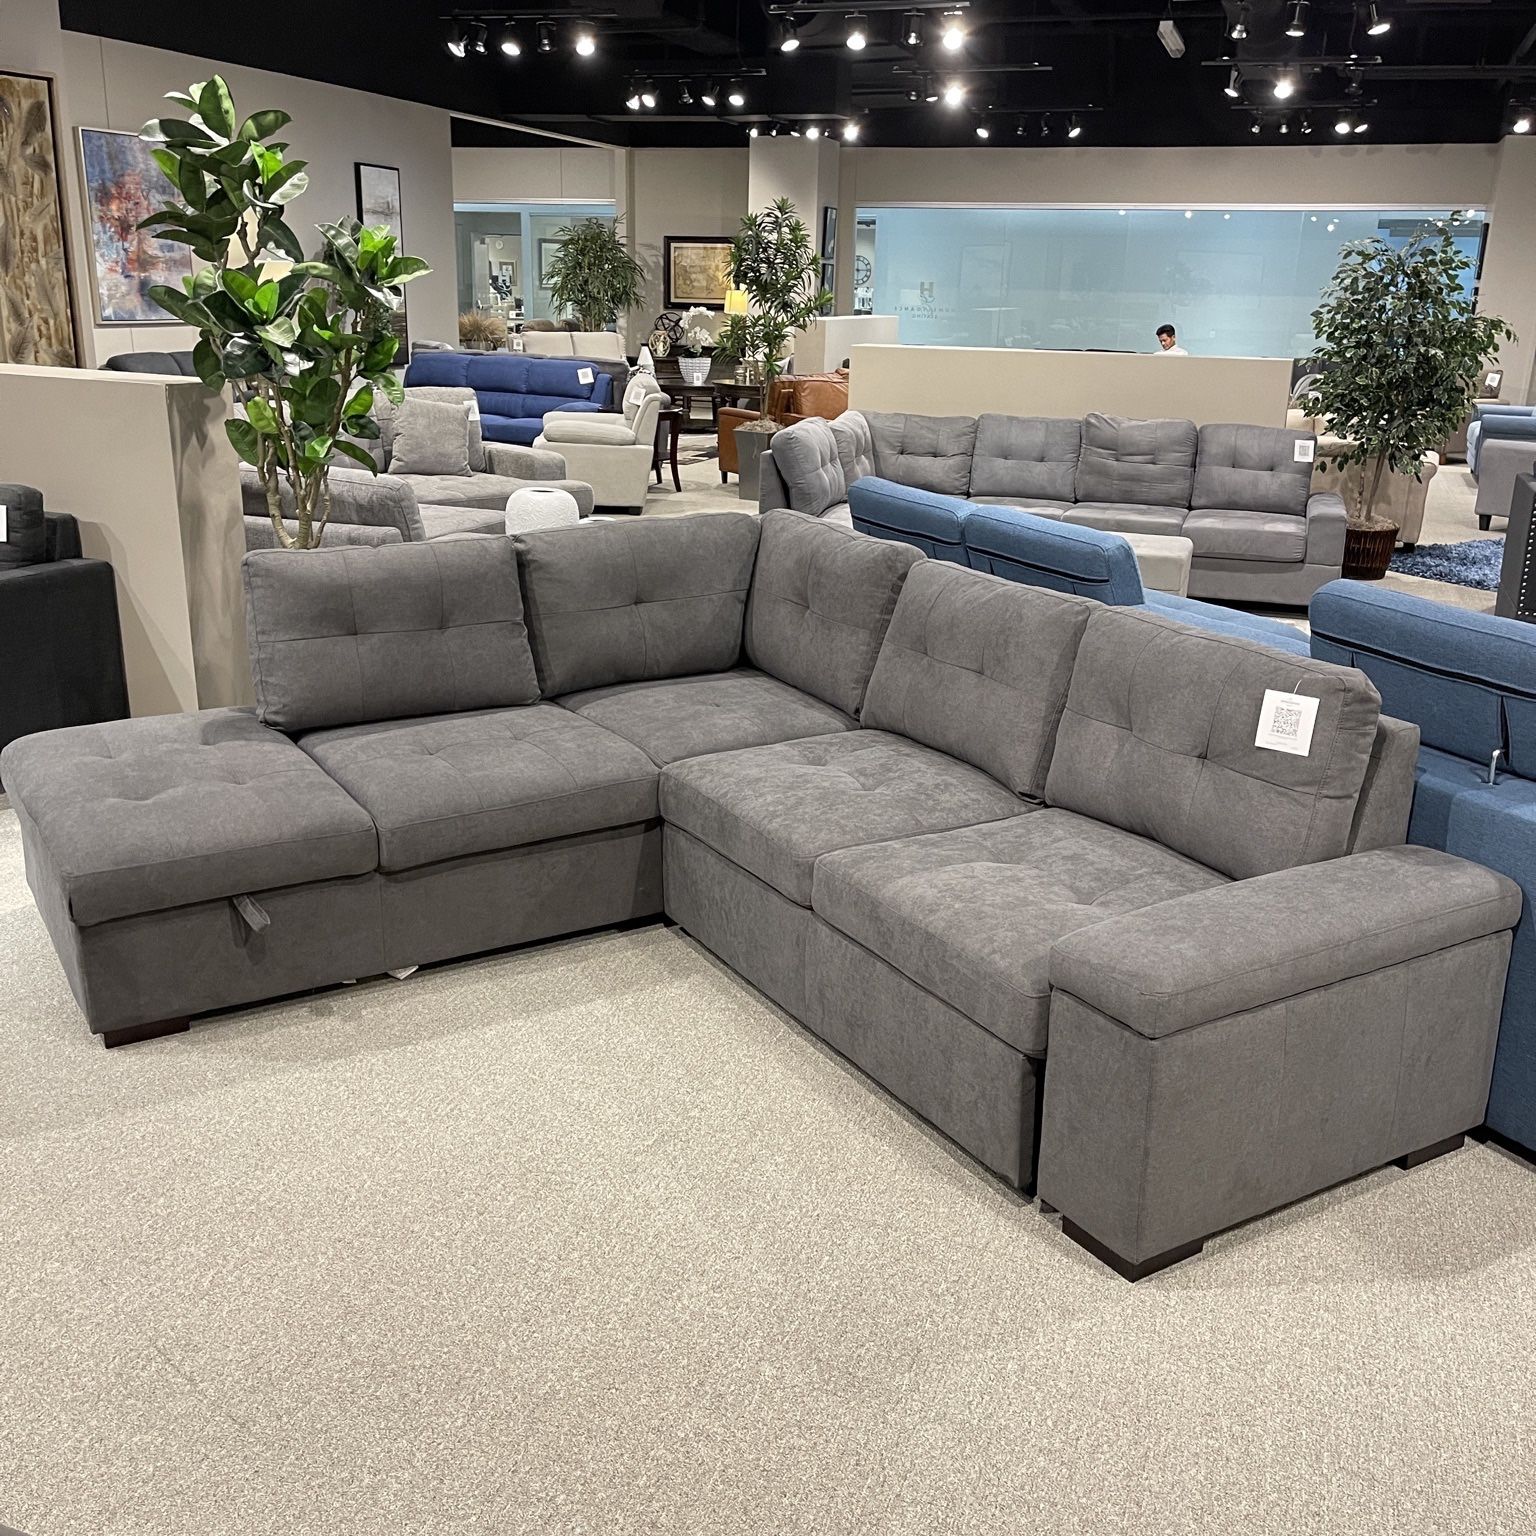 Sectional With Pull Out Bed With Storage Ottoman